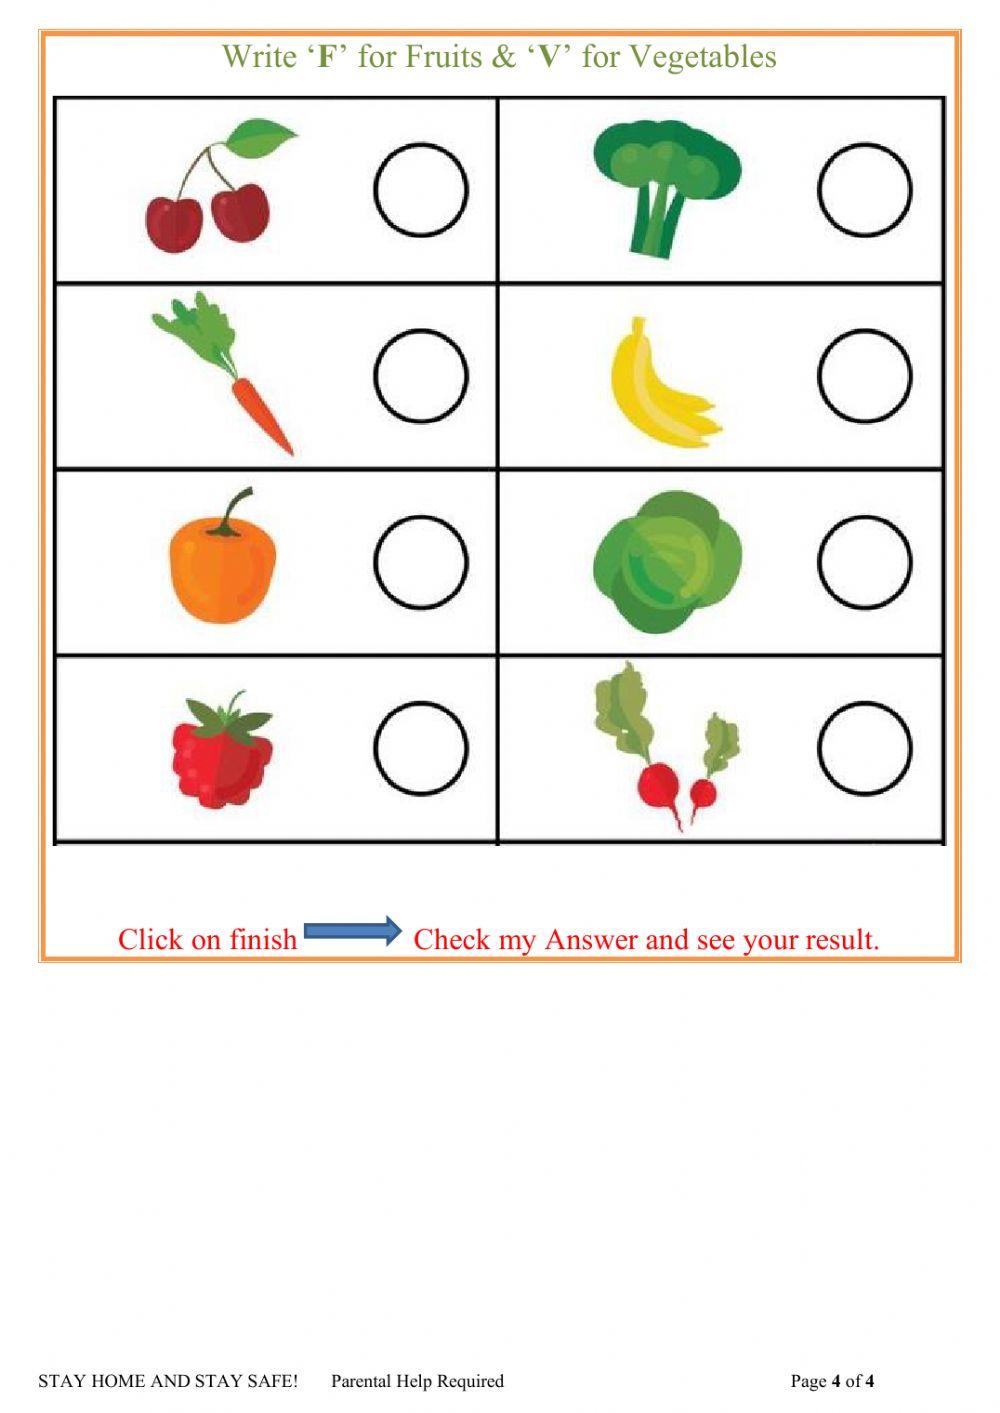 Nursery EVS Fruits and vegetables